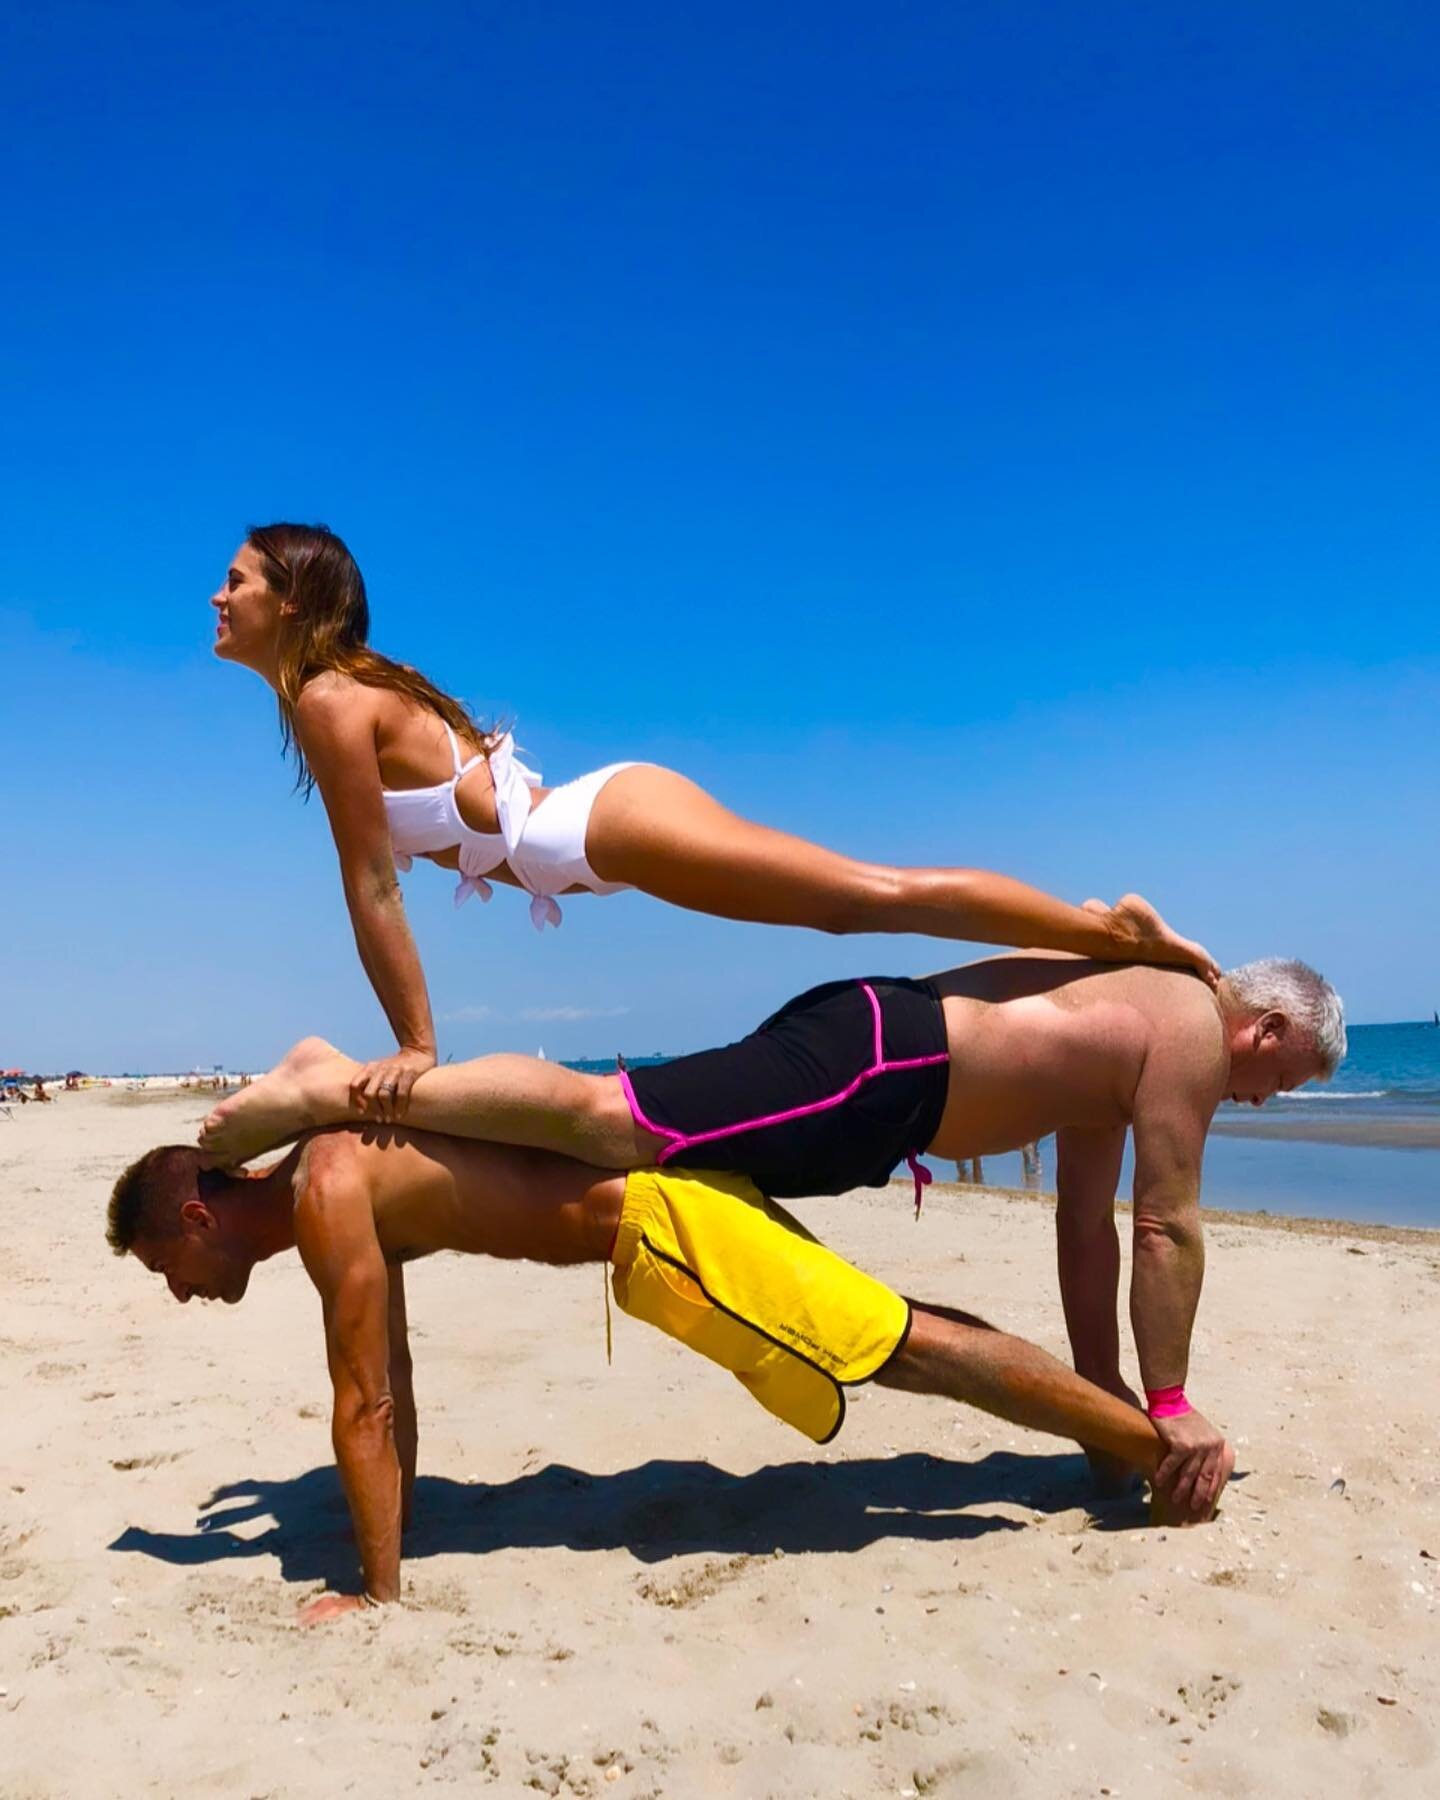 &quot;If you want to lift yourself up, lift up someone else.&quot; &ndash; Booker T. Washington

#wellness #fitness #healthylifestyle #travel #yoga #acroyoga #team #teamwork #creative #strength #goals #italy #adventure #wanderlust #nutrition #gratitu